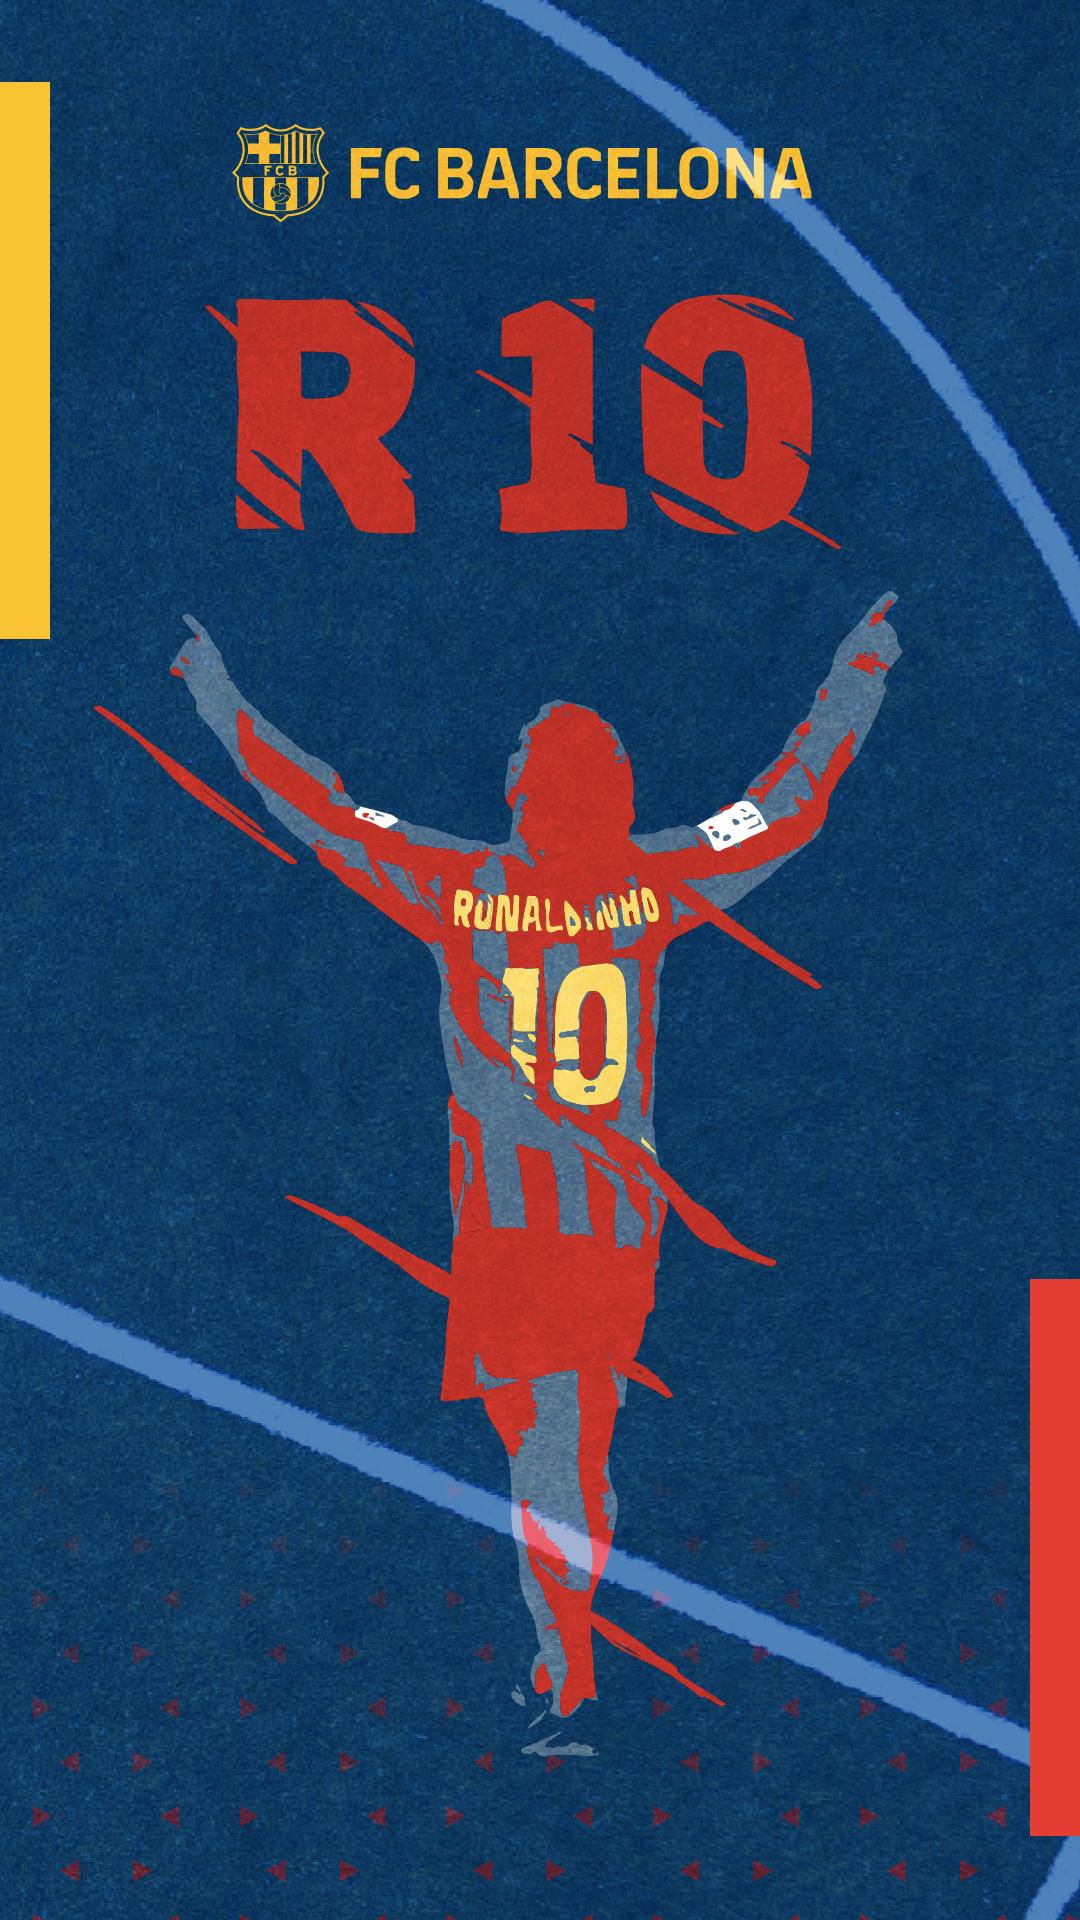 Barca Iphone Wallpapers